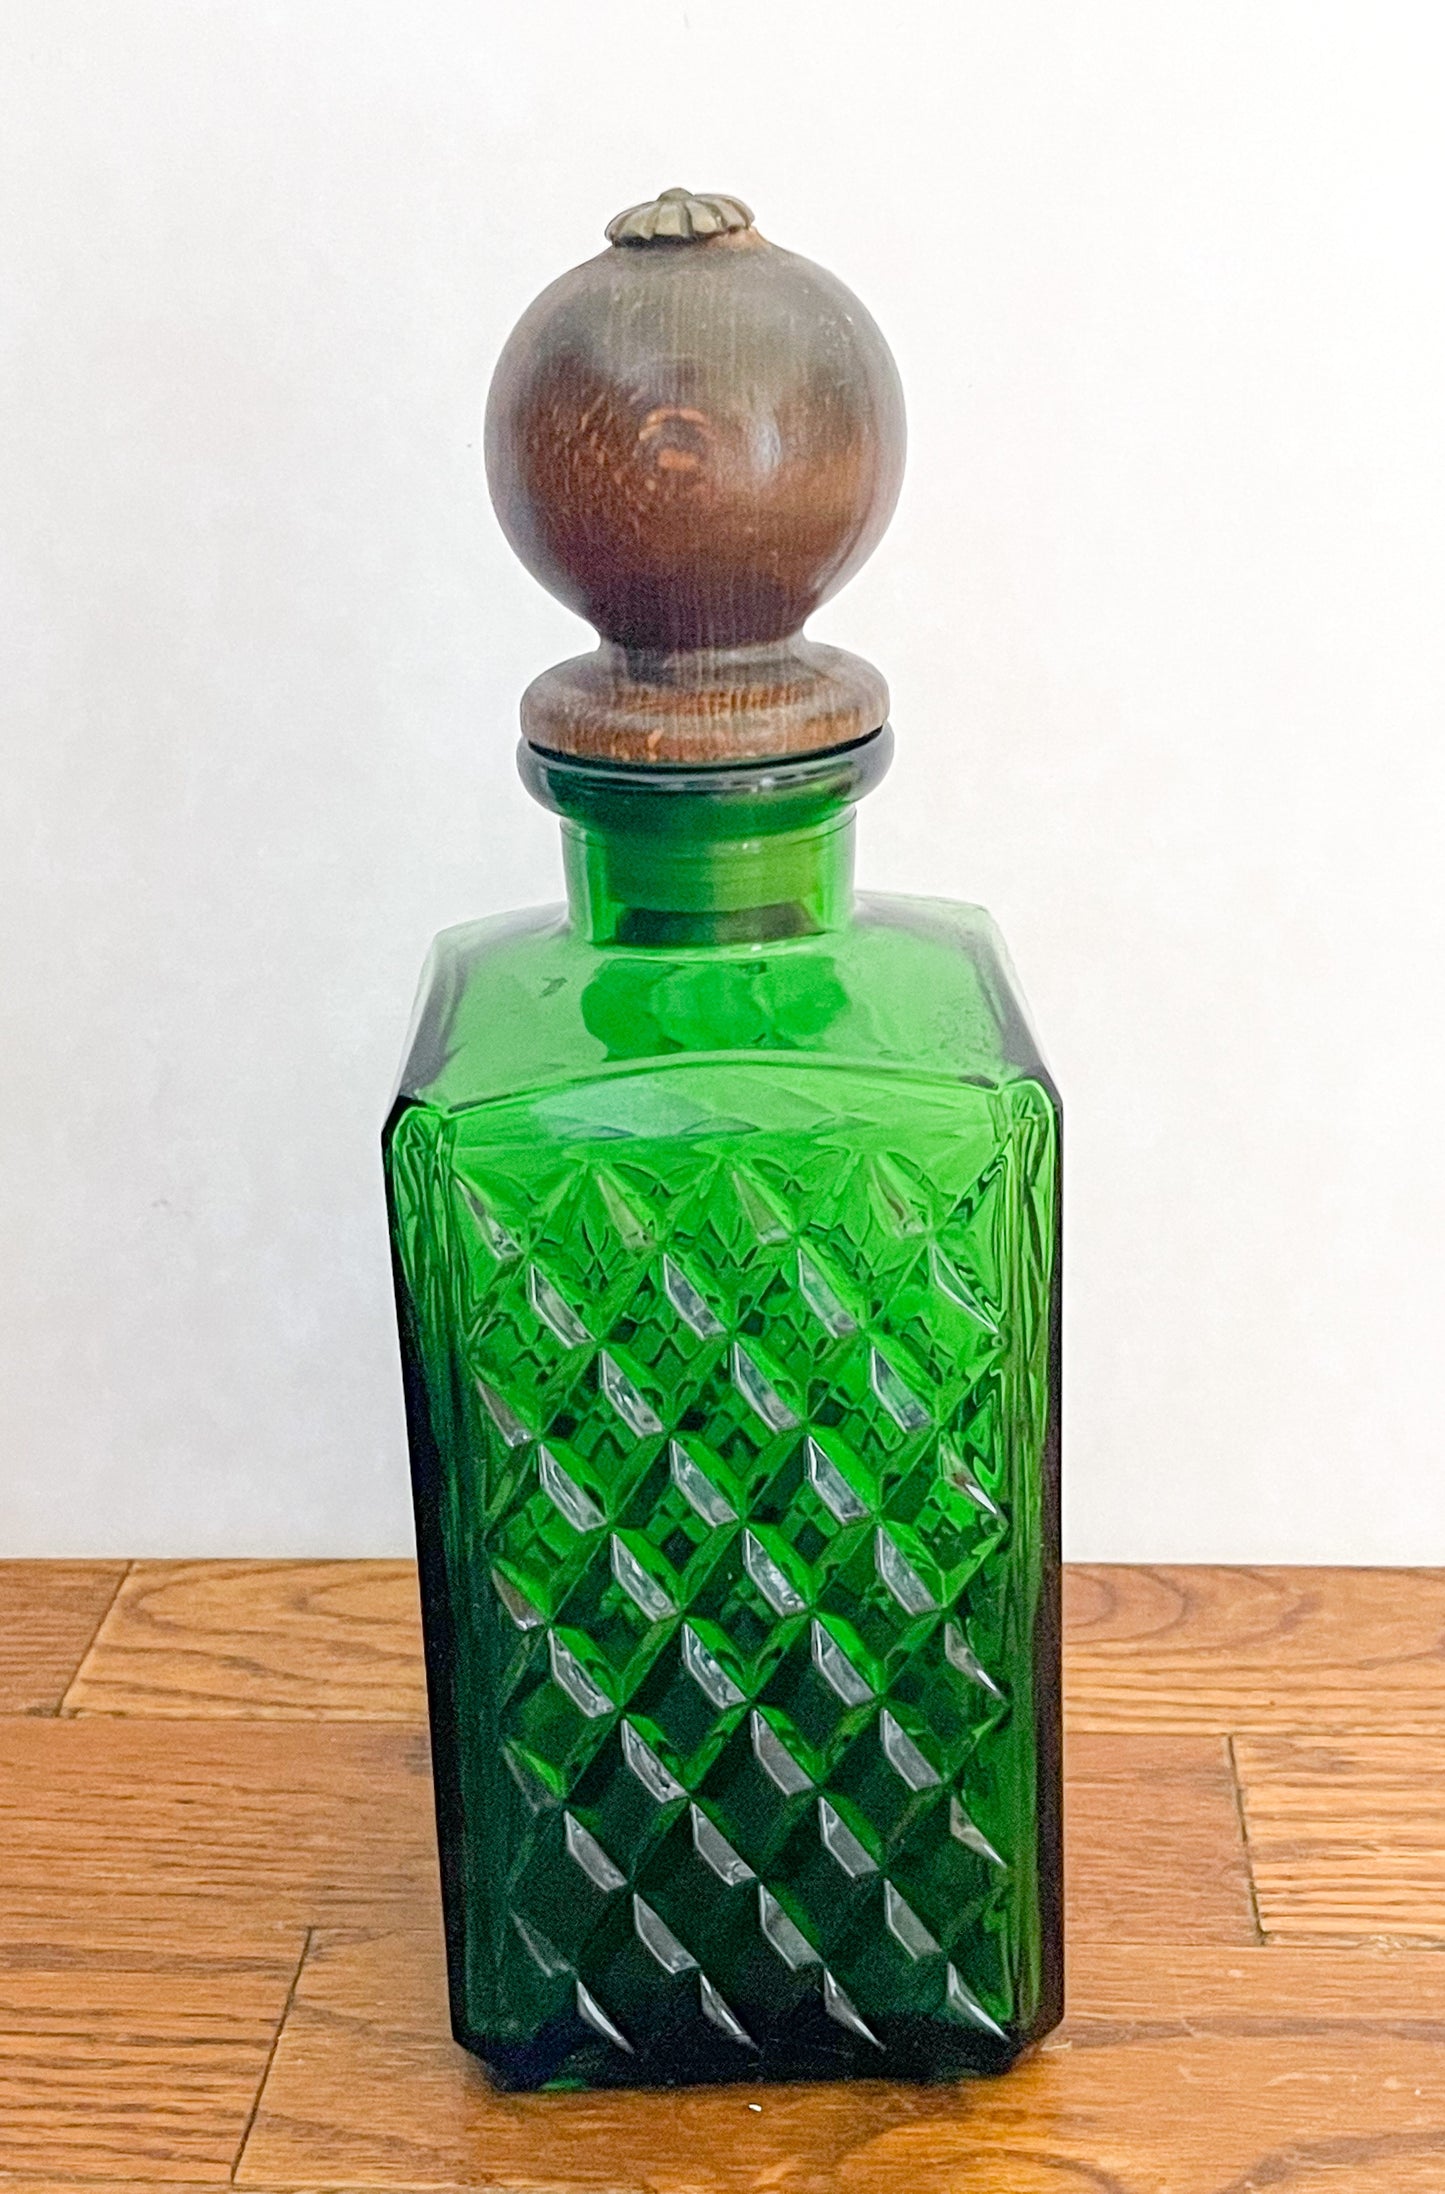 Vintage Emerald  Green Glass Decanter with Wooden Lid.